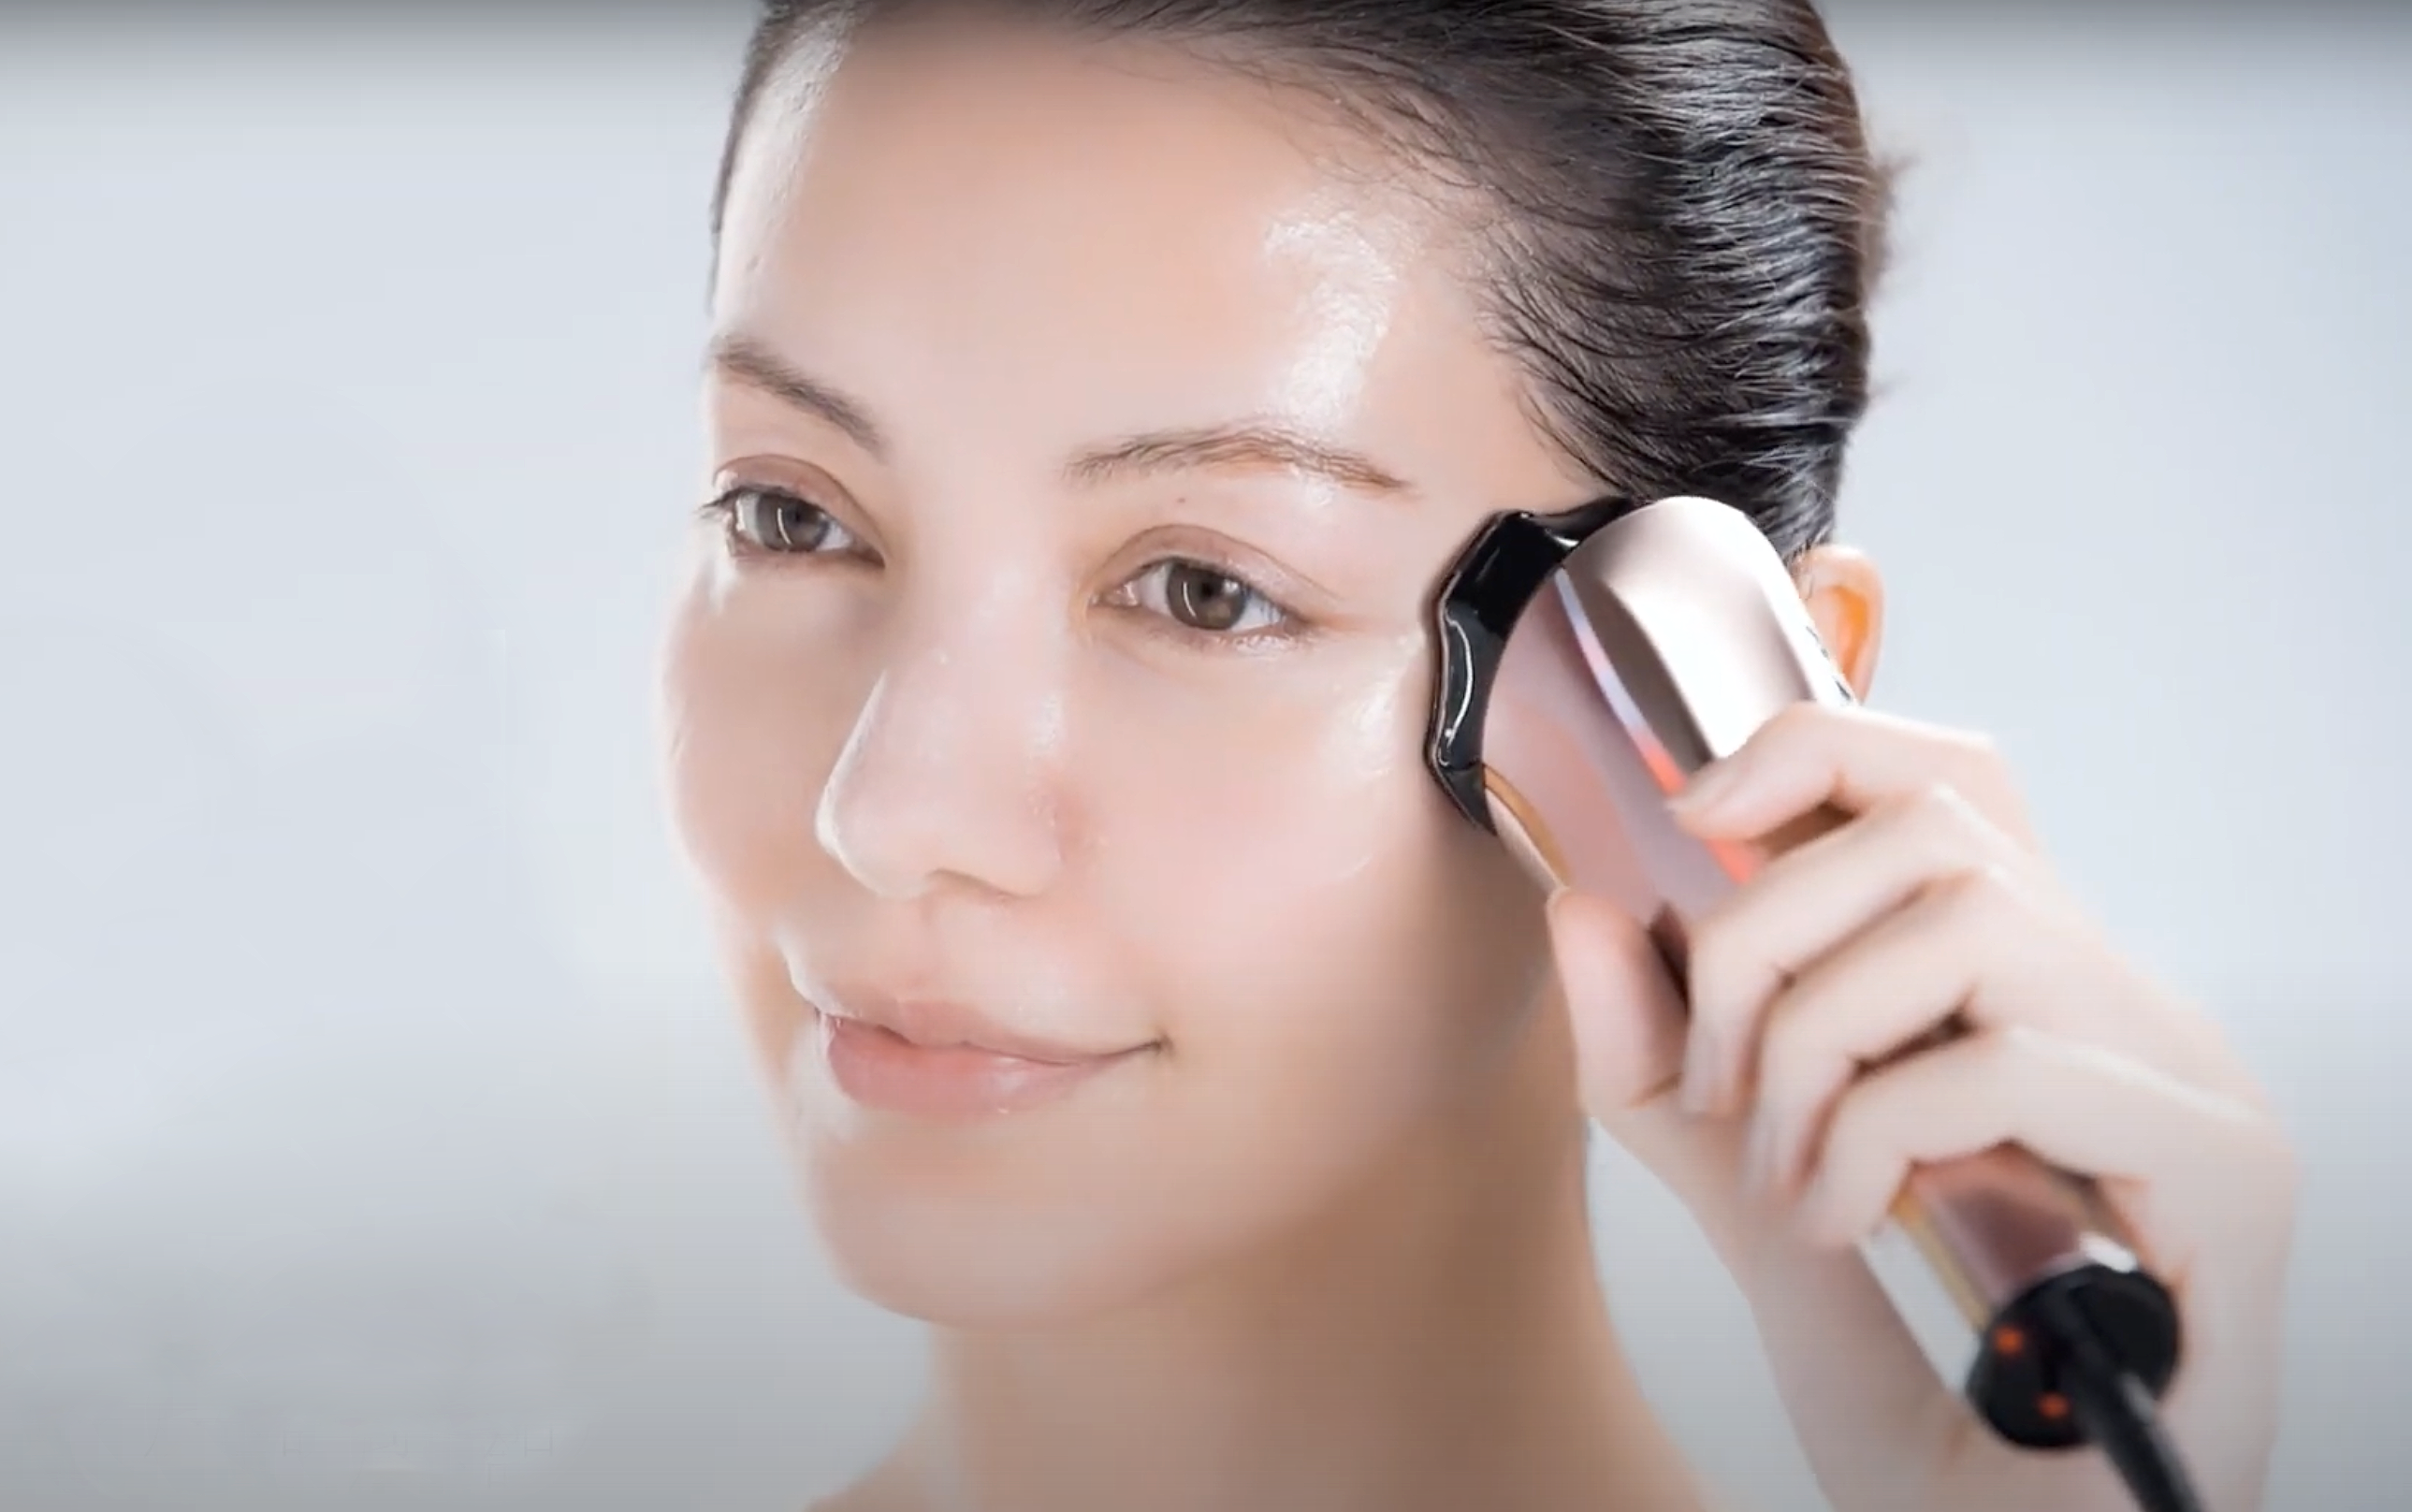 How To Use the Dr. Arrivo Zeus II Beauty Device